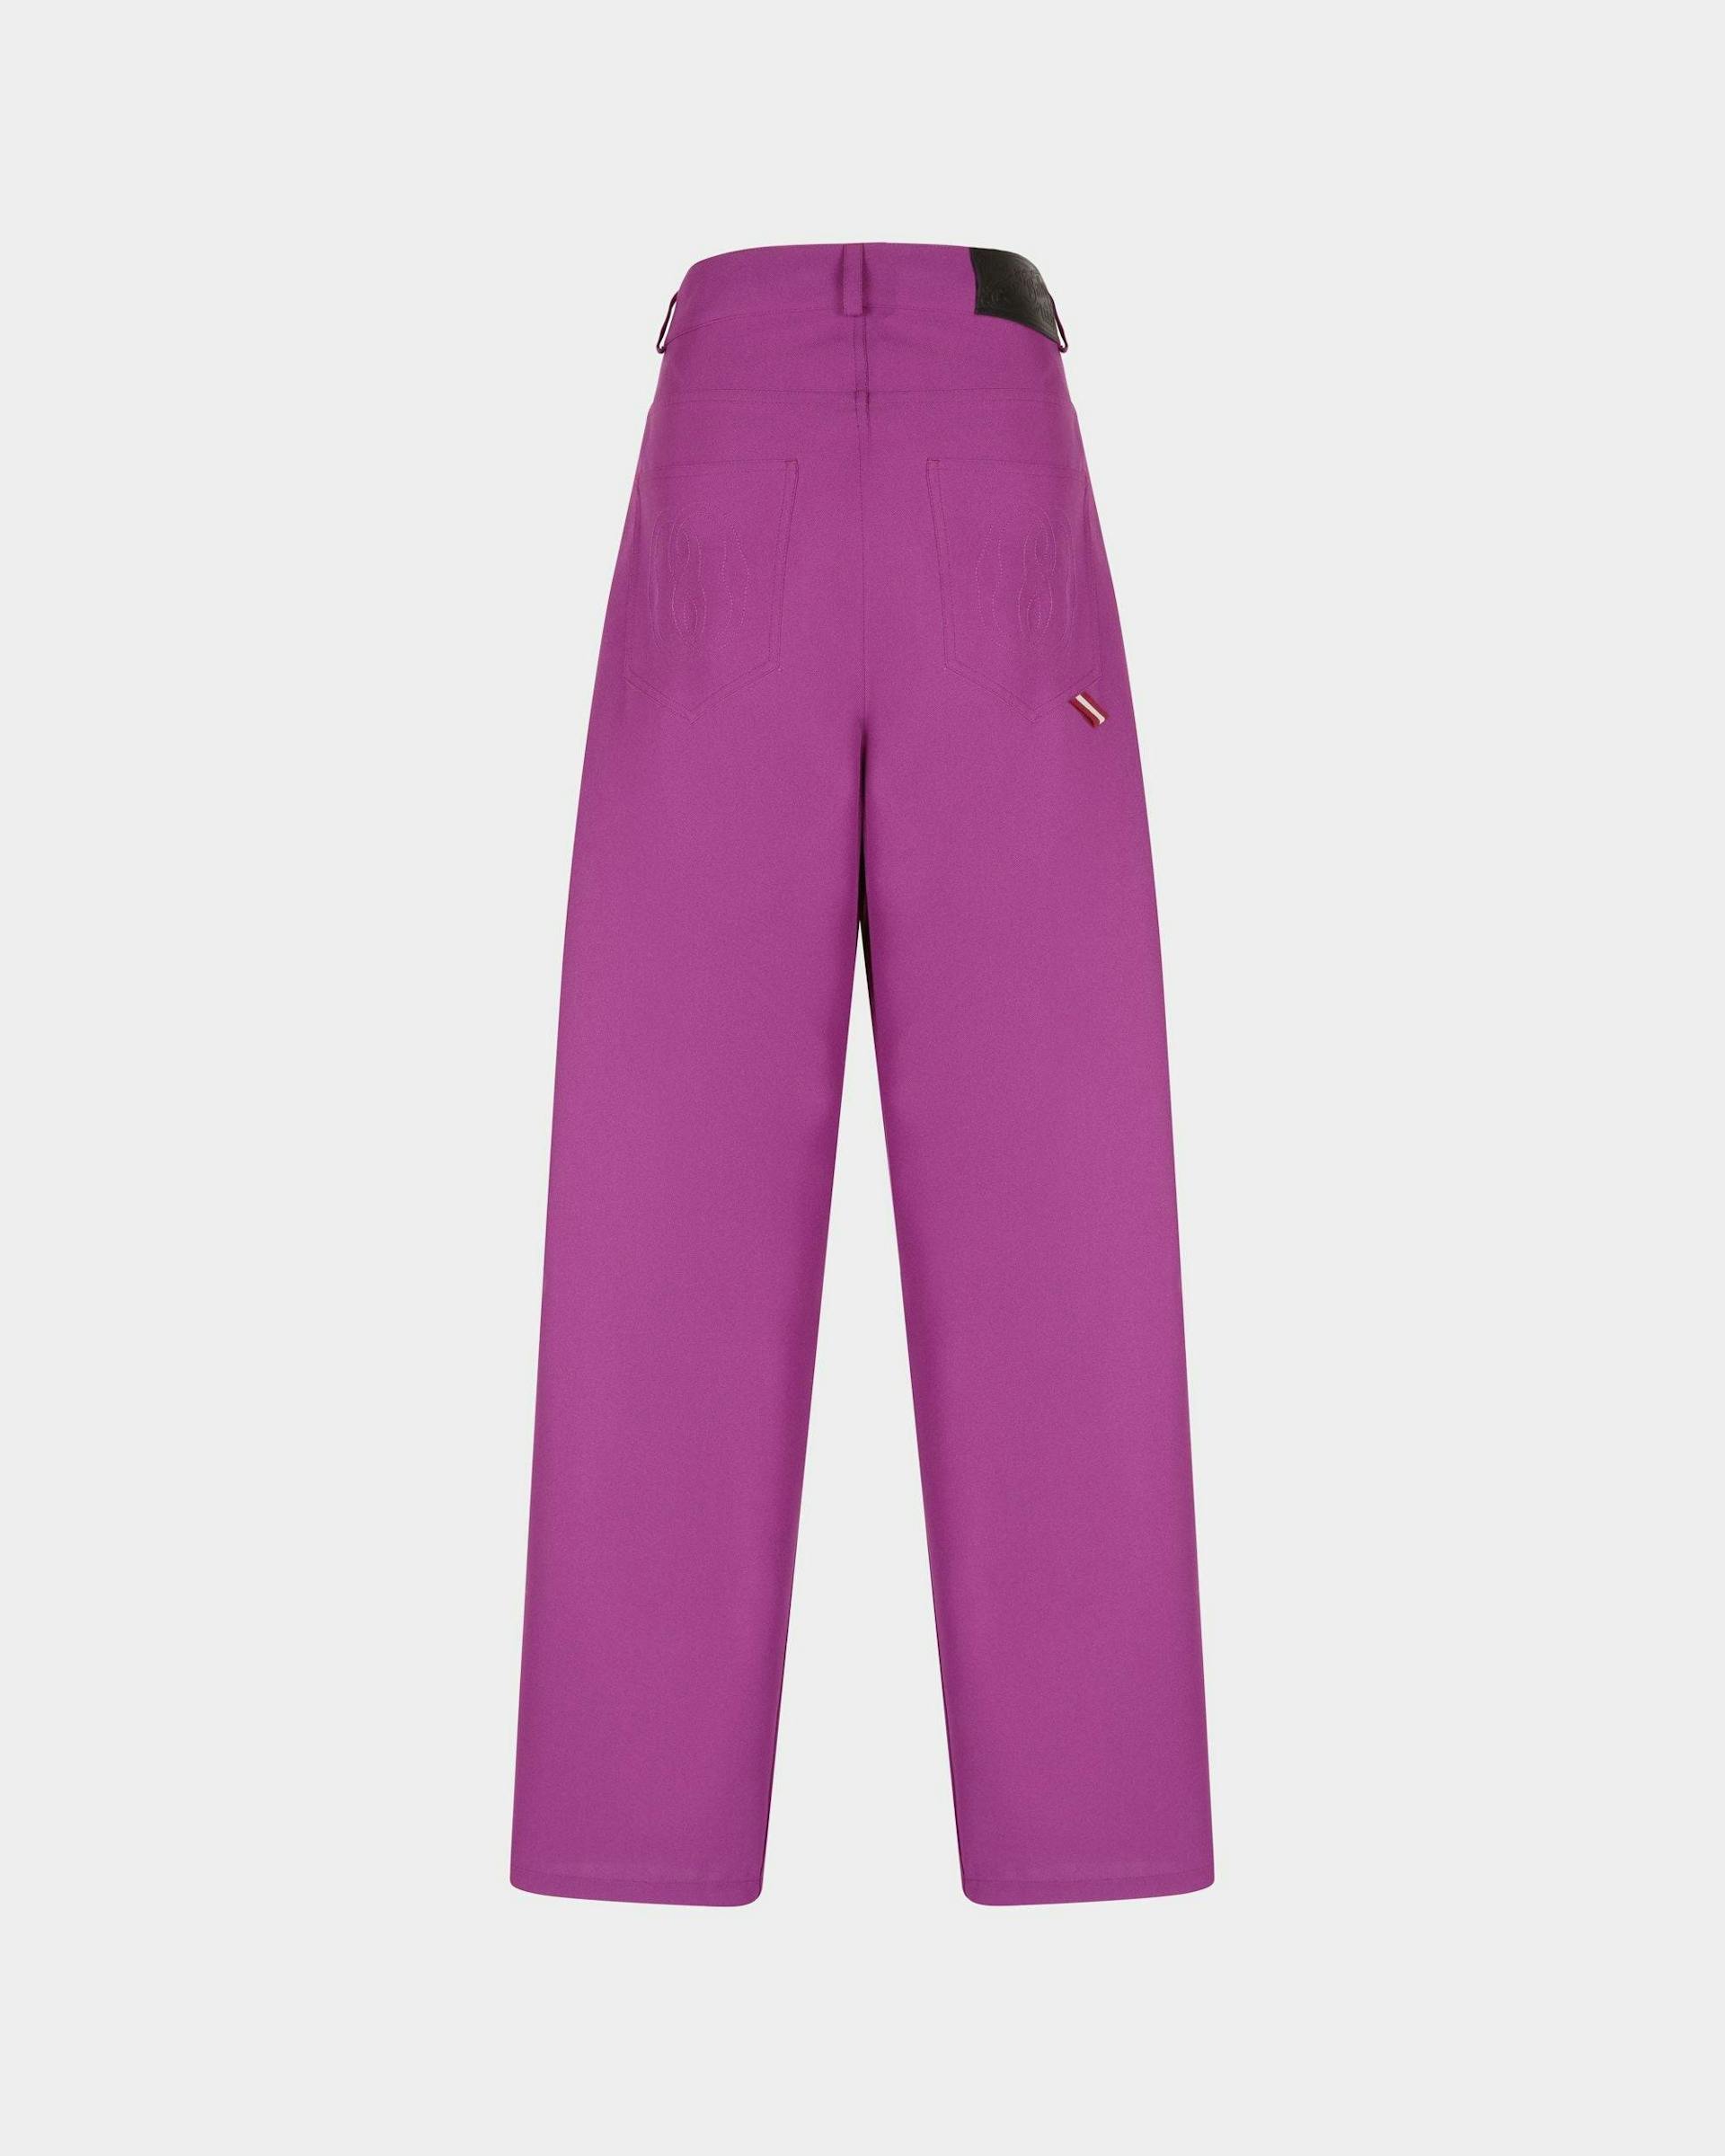 Women's High Waisted Pants In Pink | Bally | Still Life Back